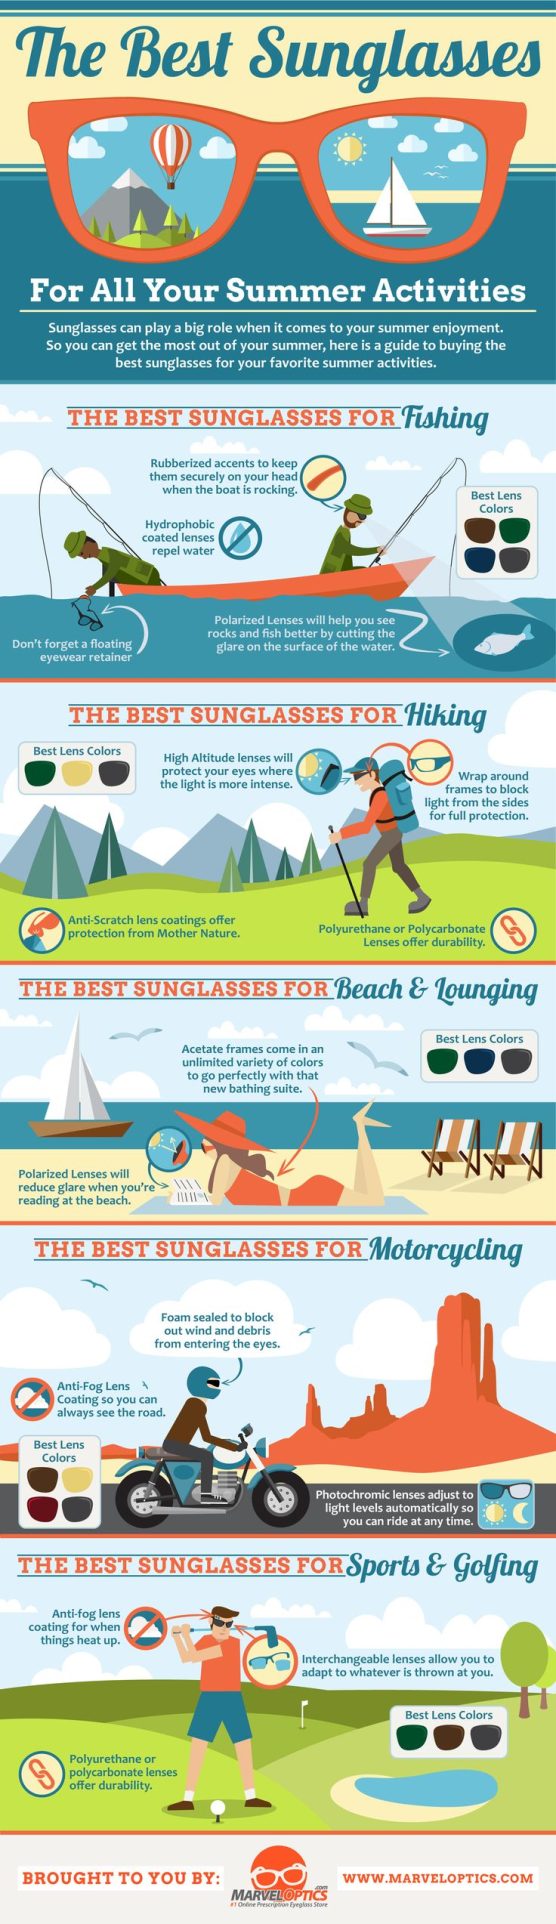 The Best Sunglasses For Summer Activities